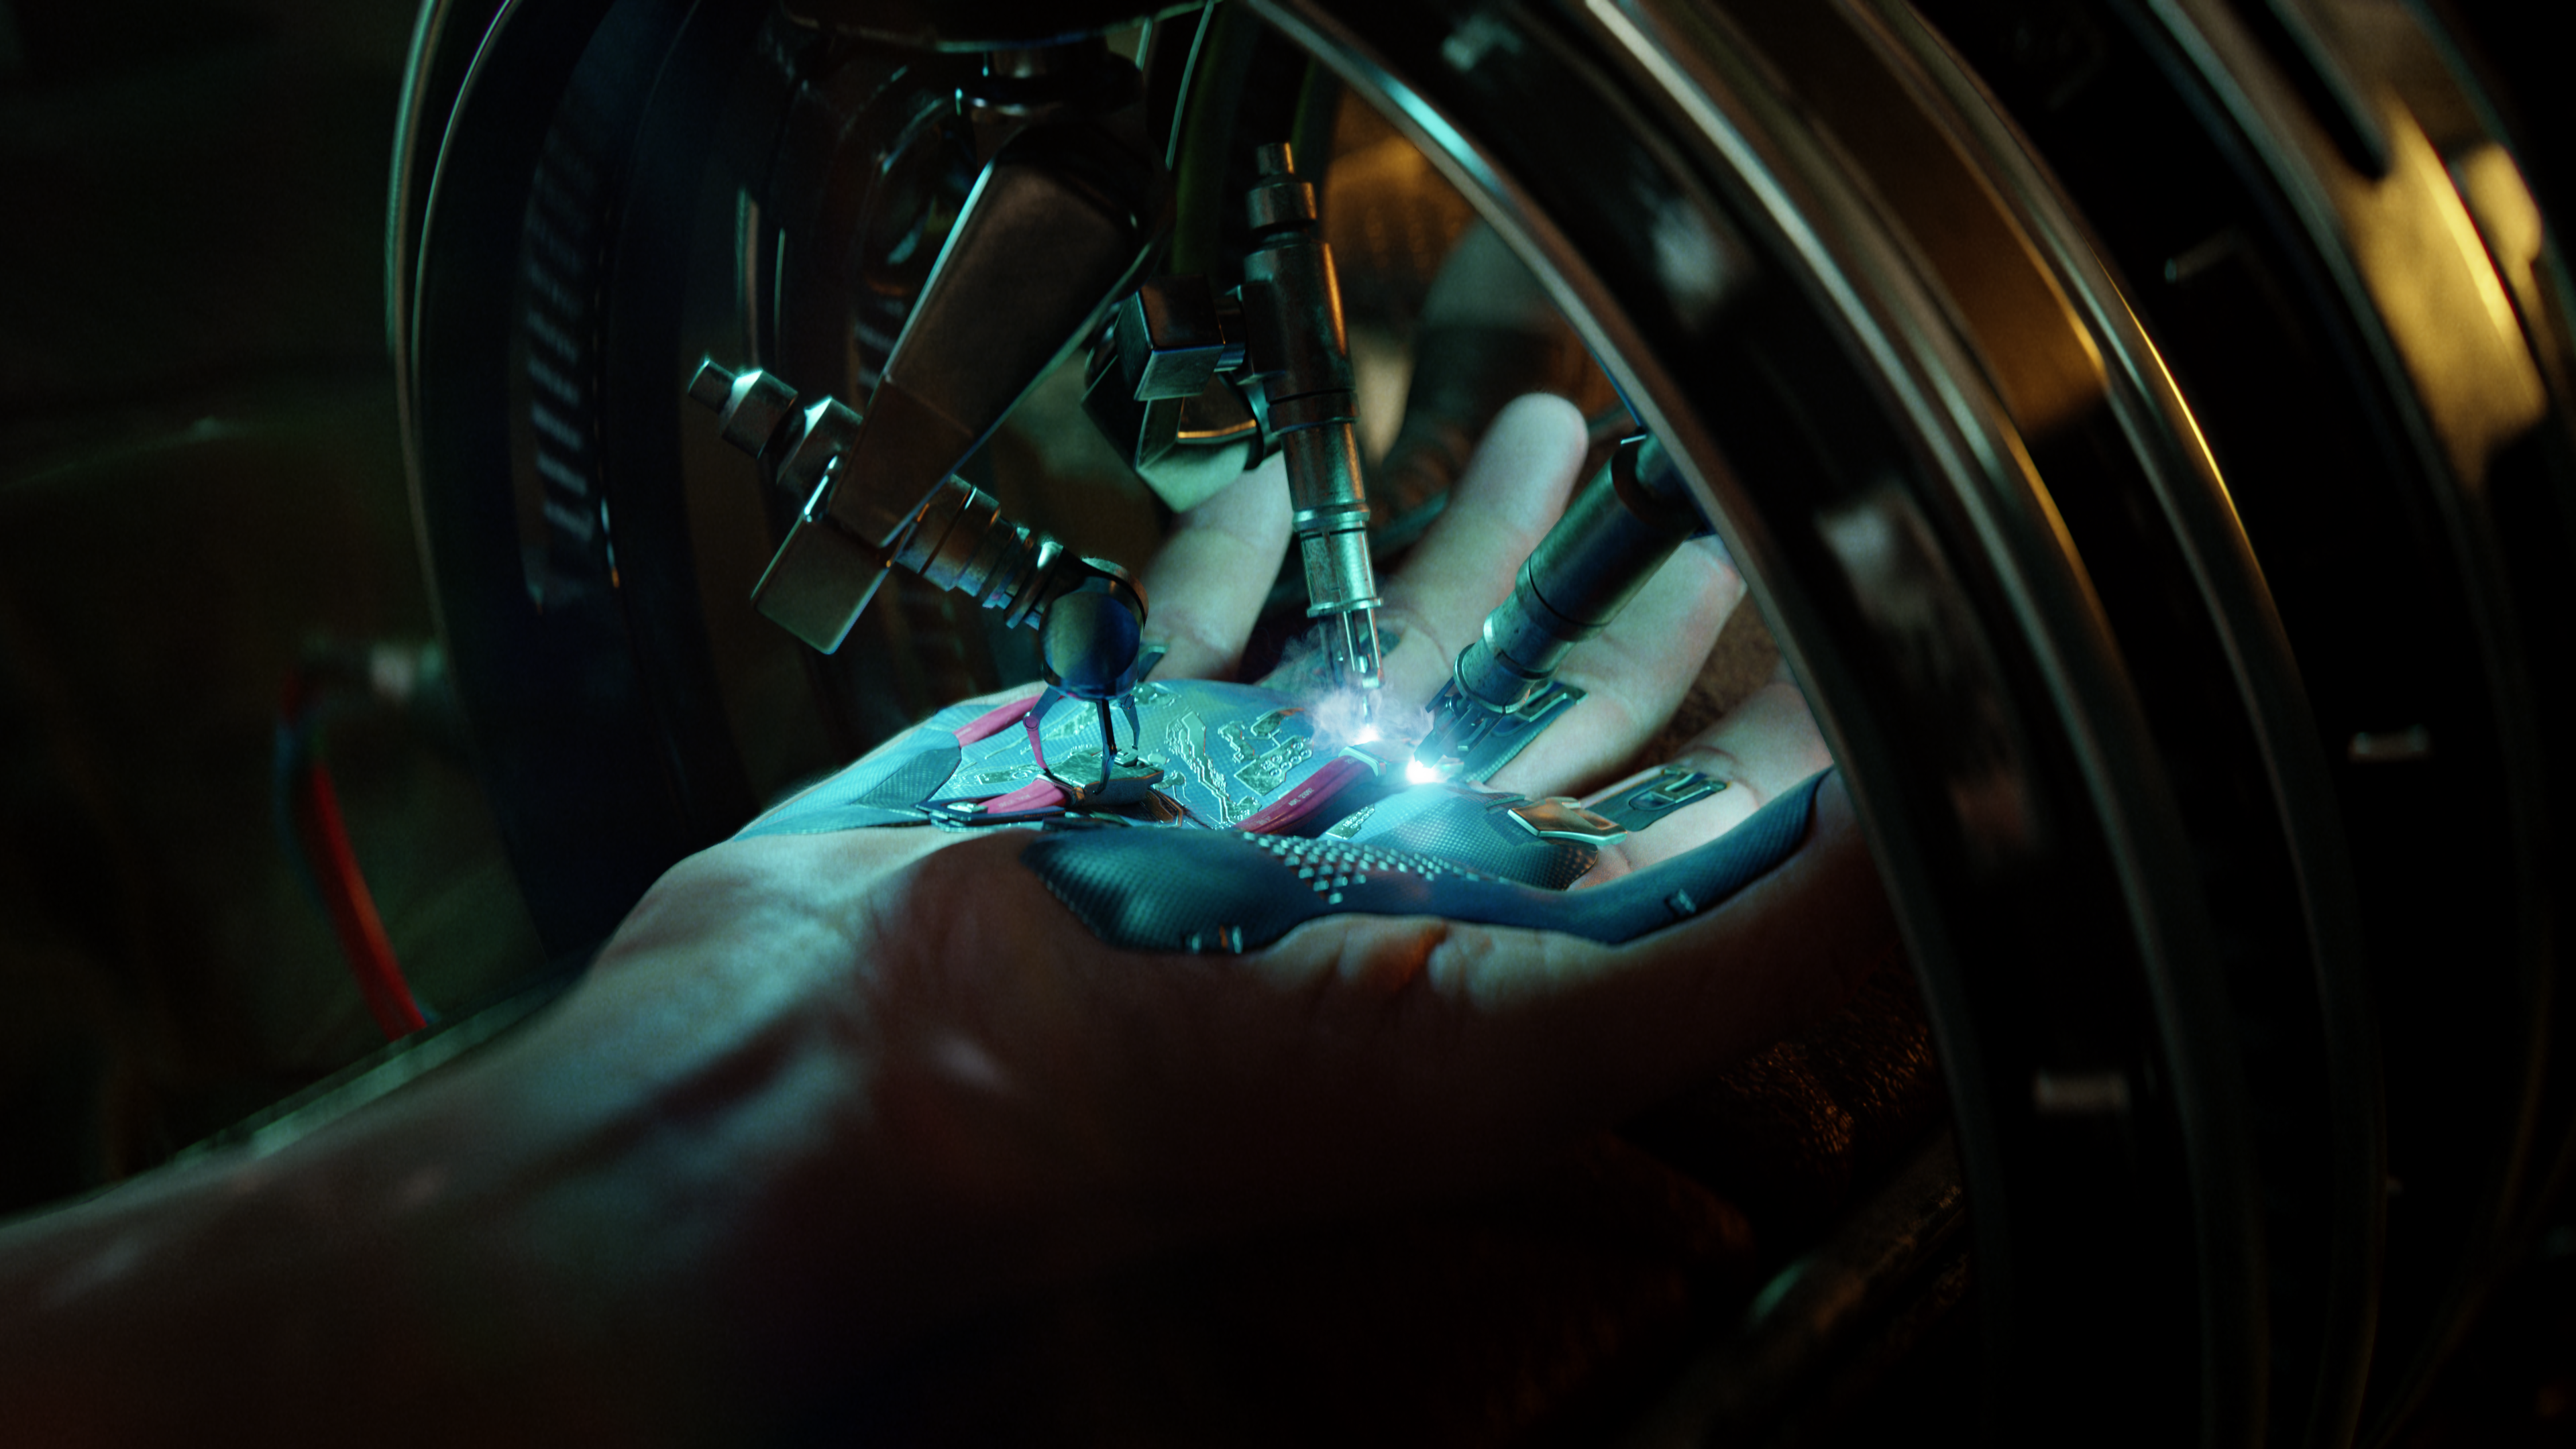 Cyberpunk 2077 key art showing a hand under a blue light being jabbed with robotic needles